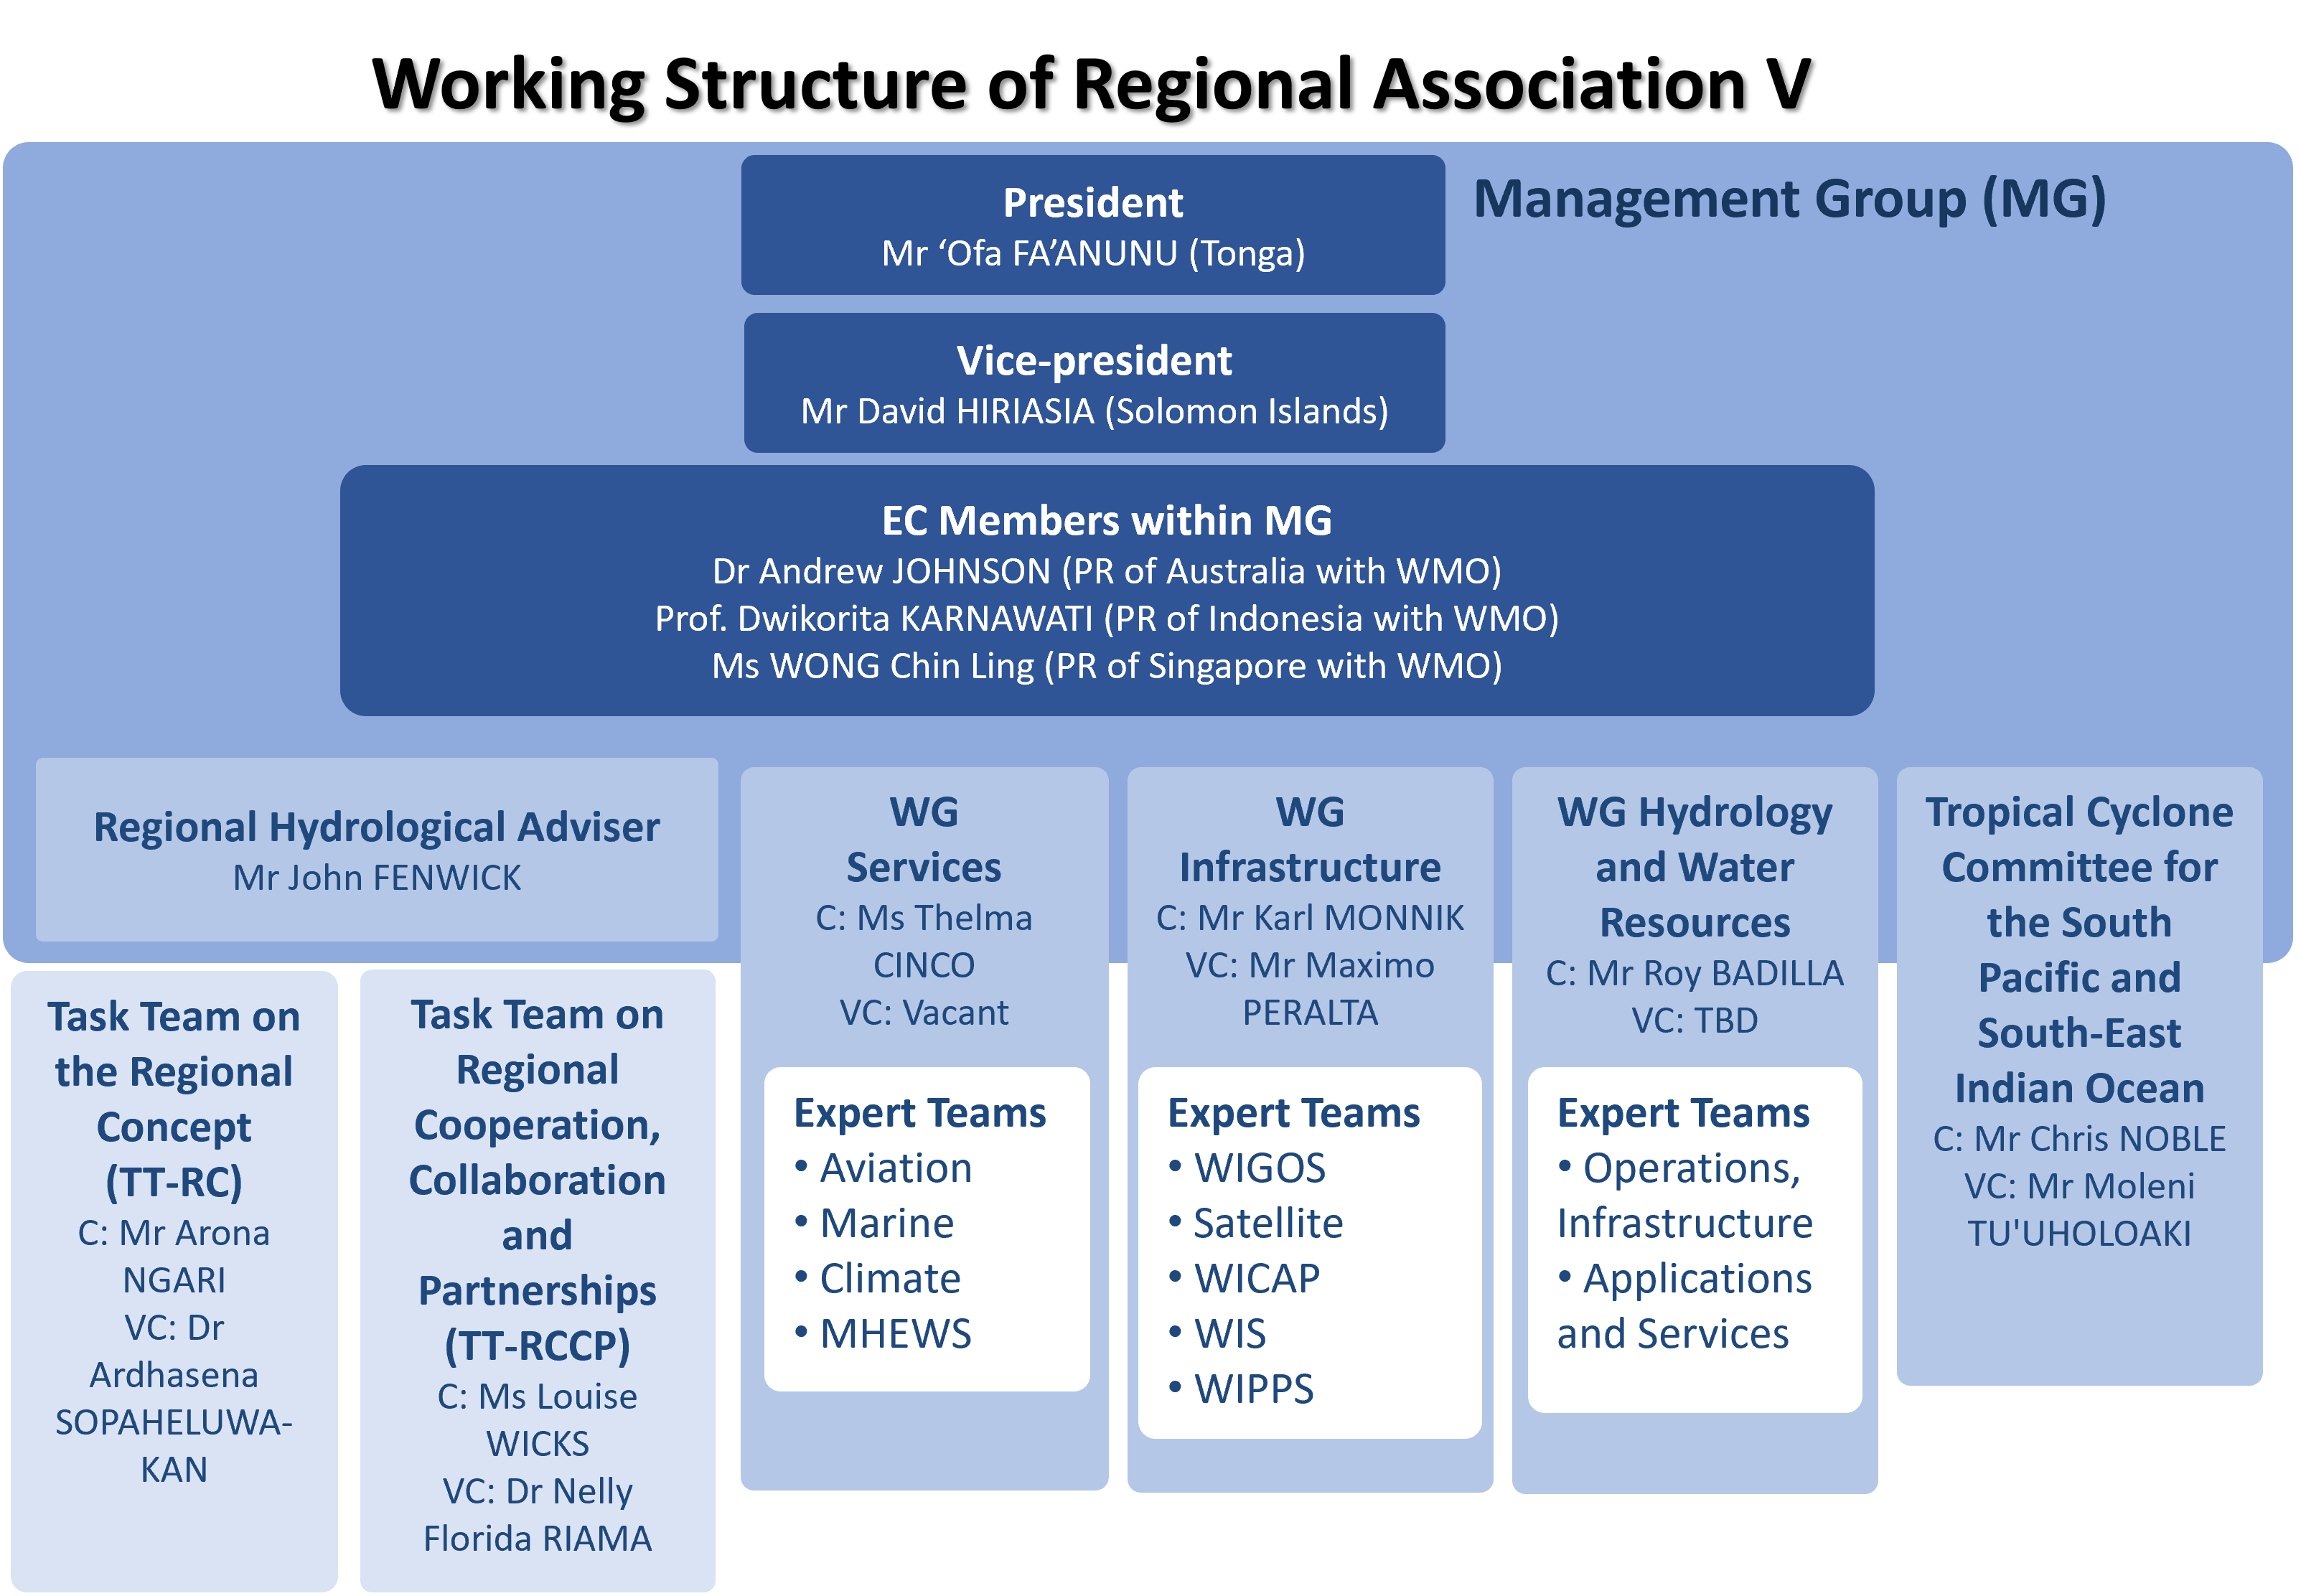 RA V working structure